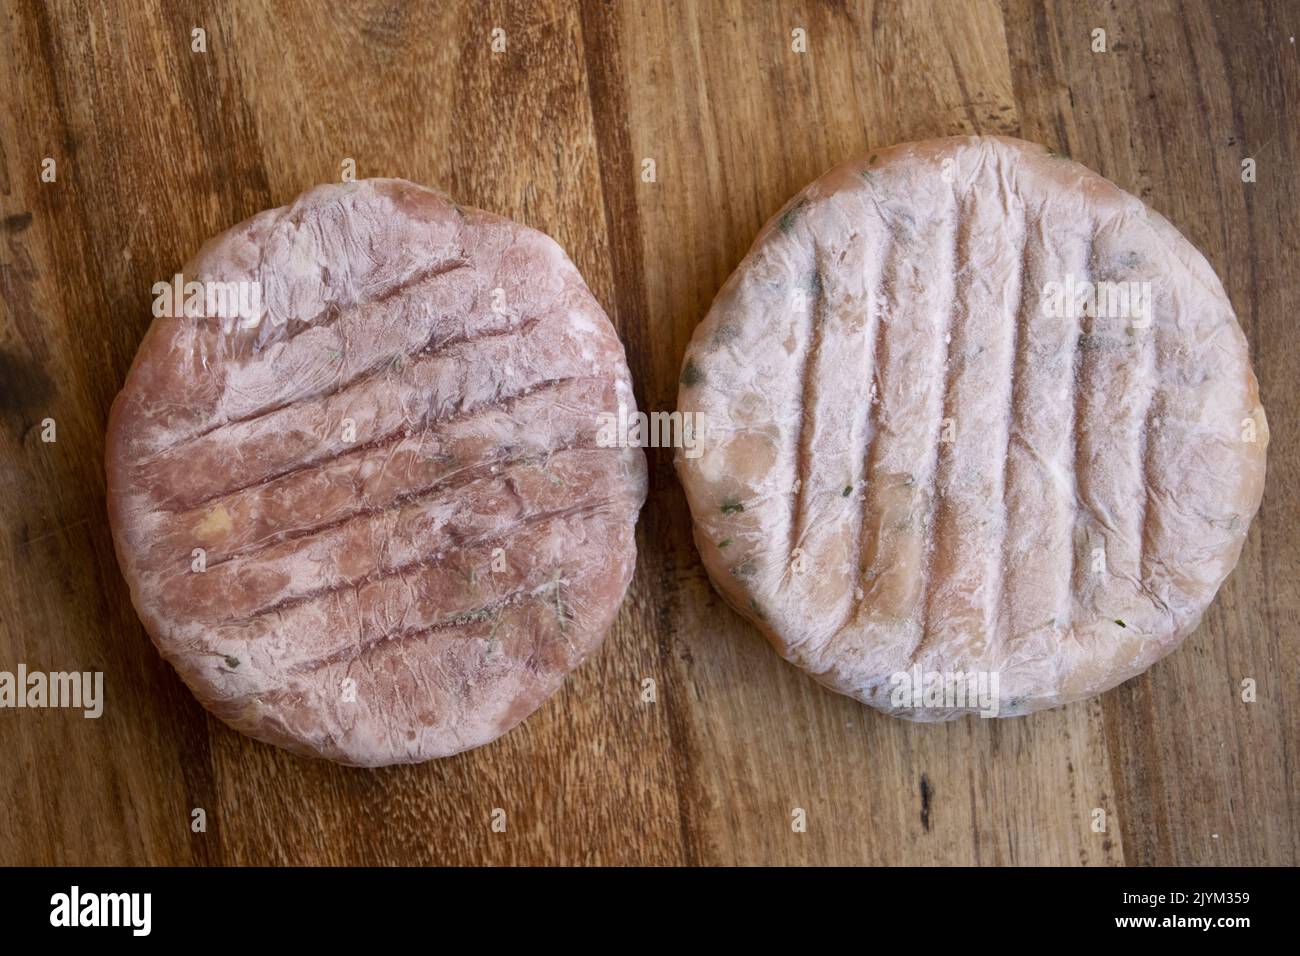 frozen assorted hamburgers of white and red meat Stock Photo